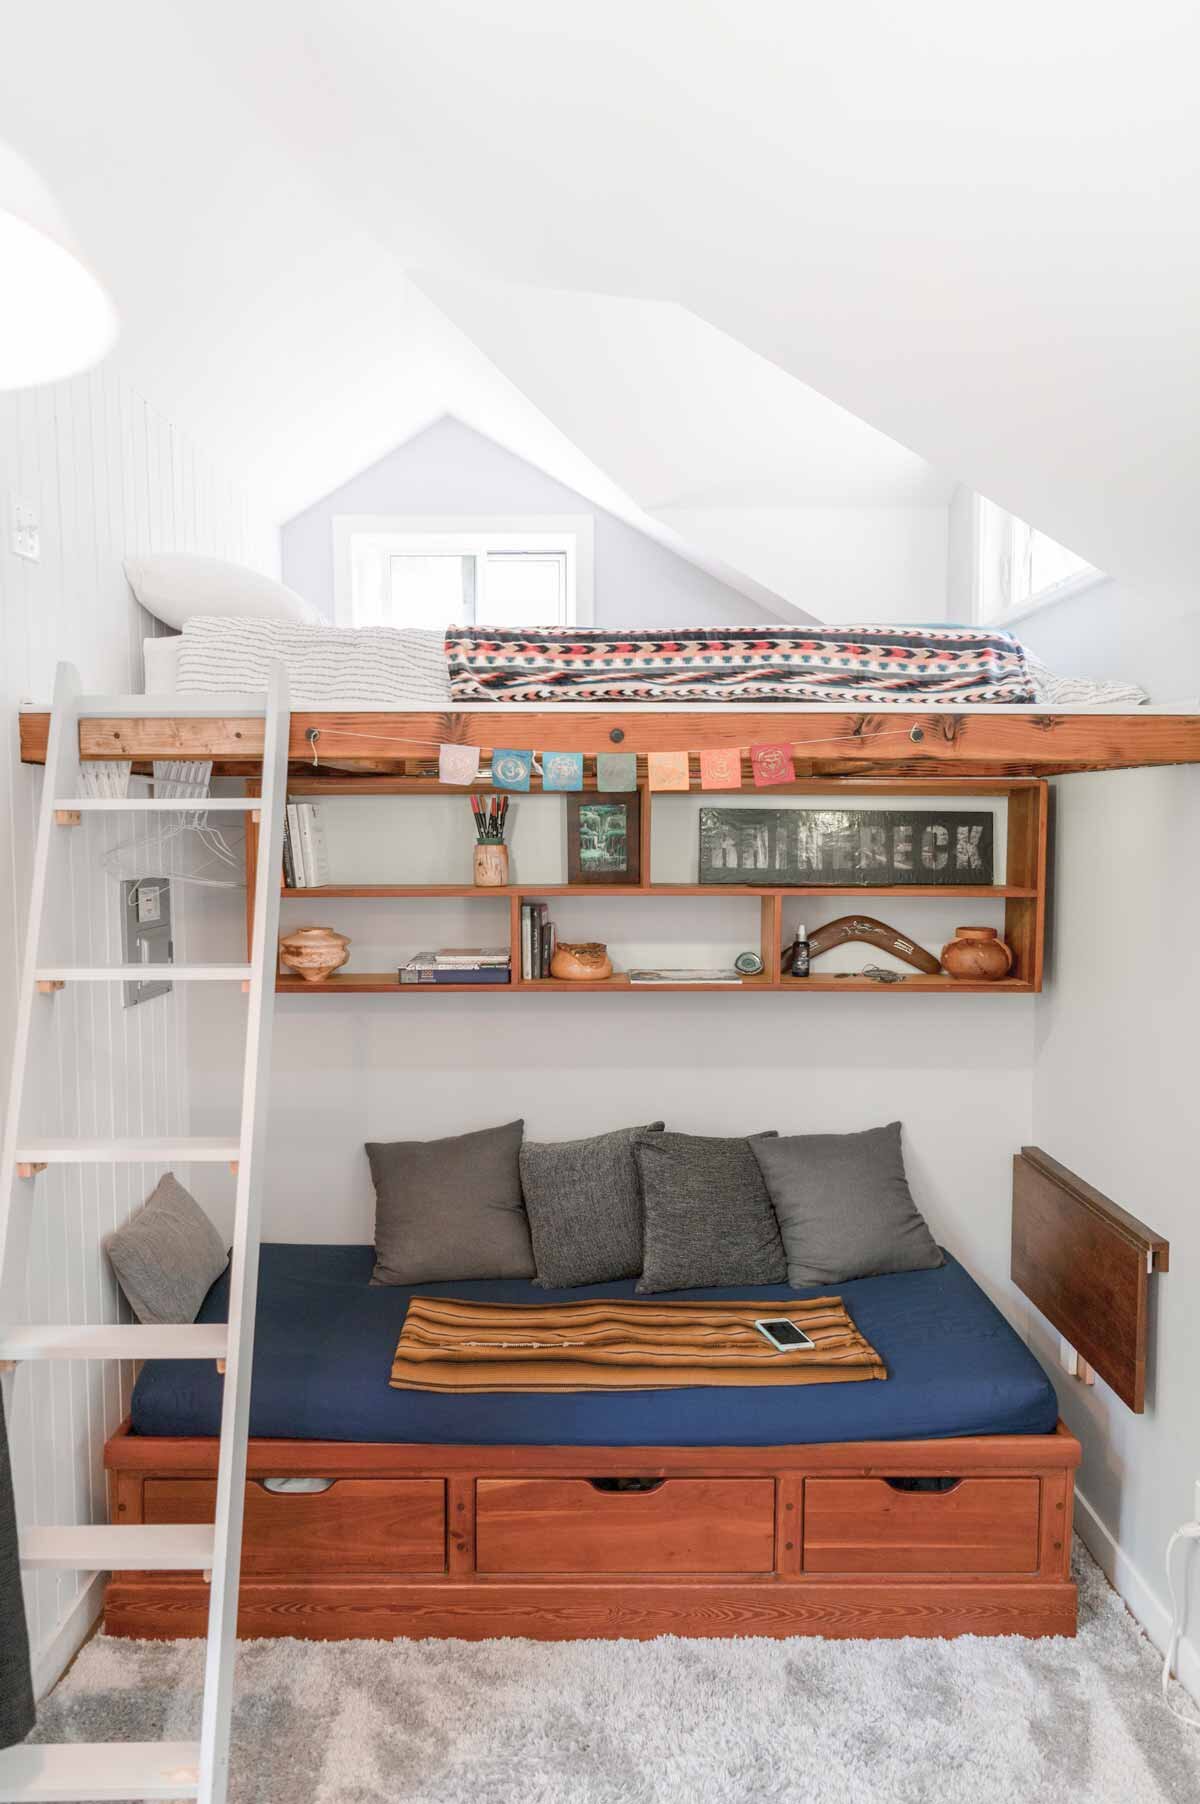 10 Awesome Bed Alternatives For Small, Bunk Bed Alternatives